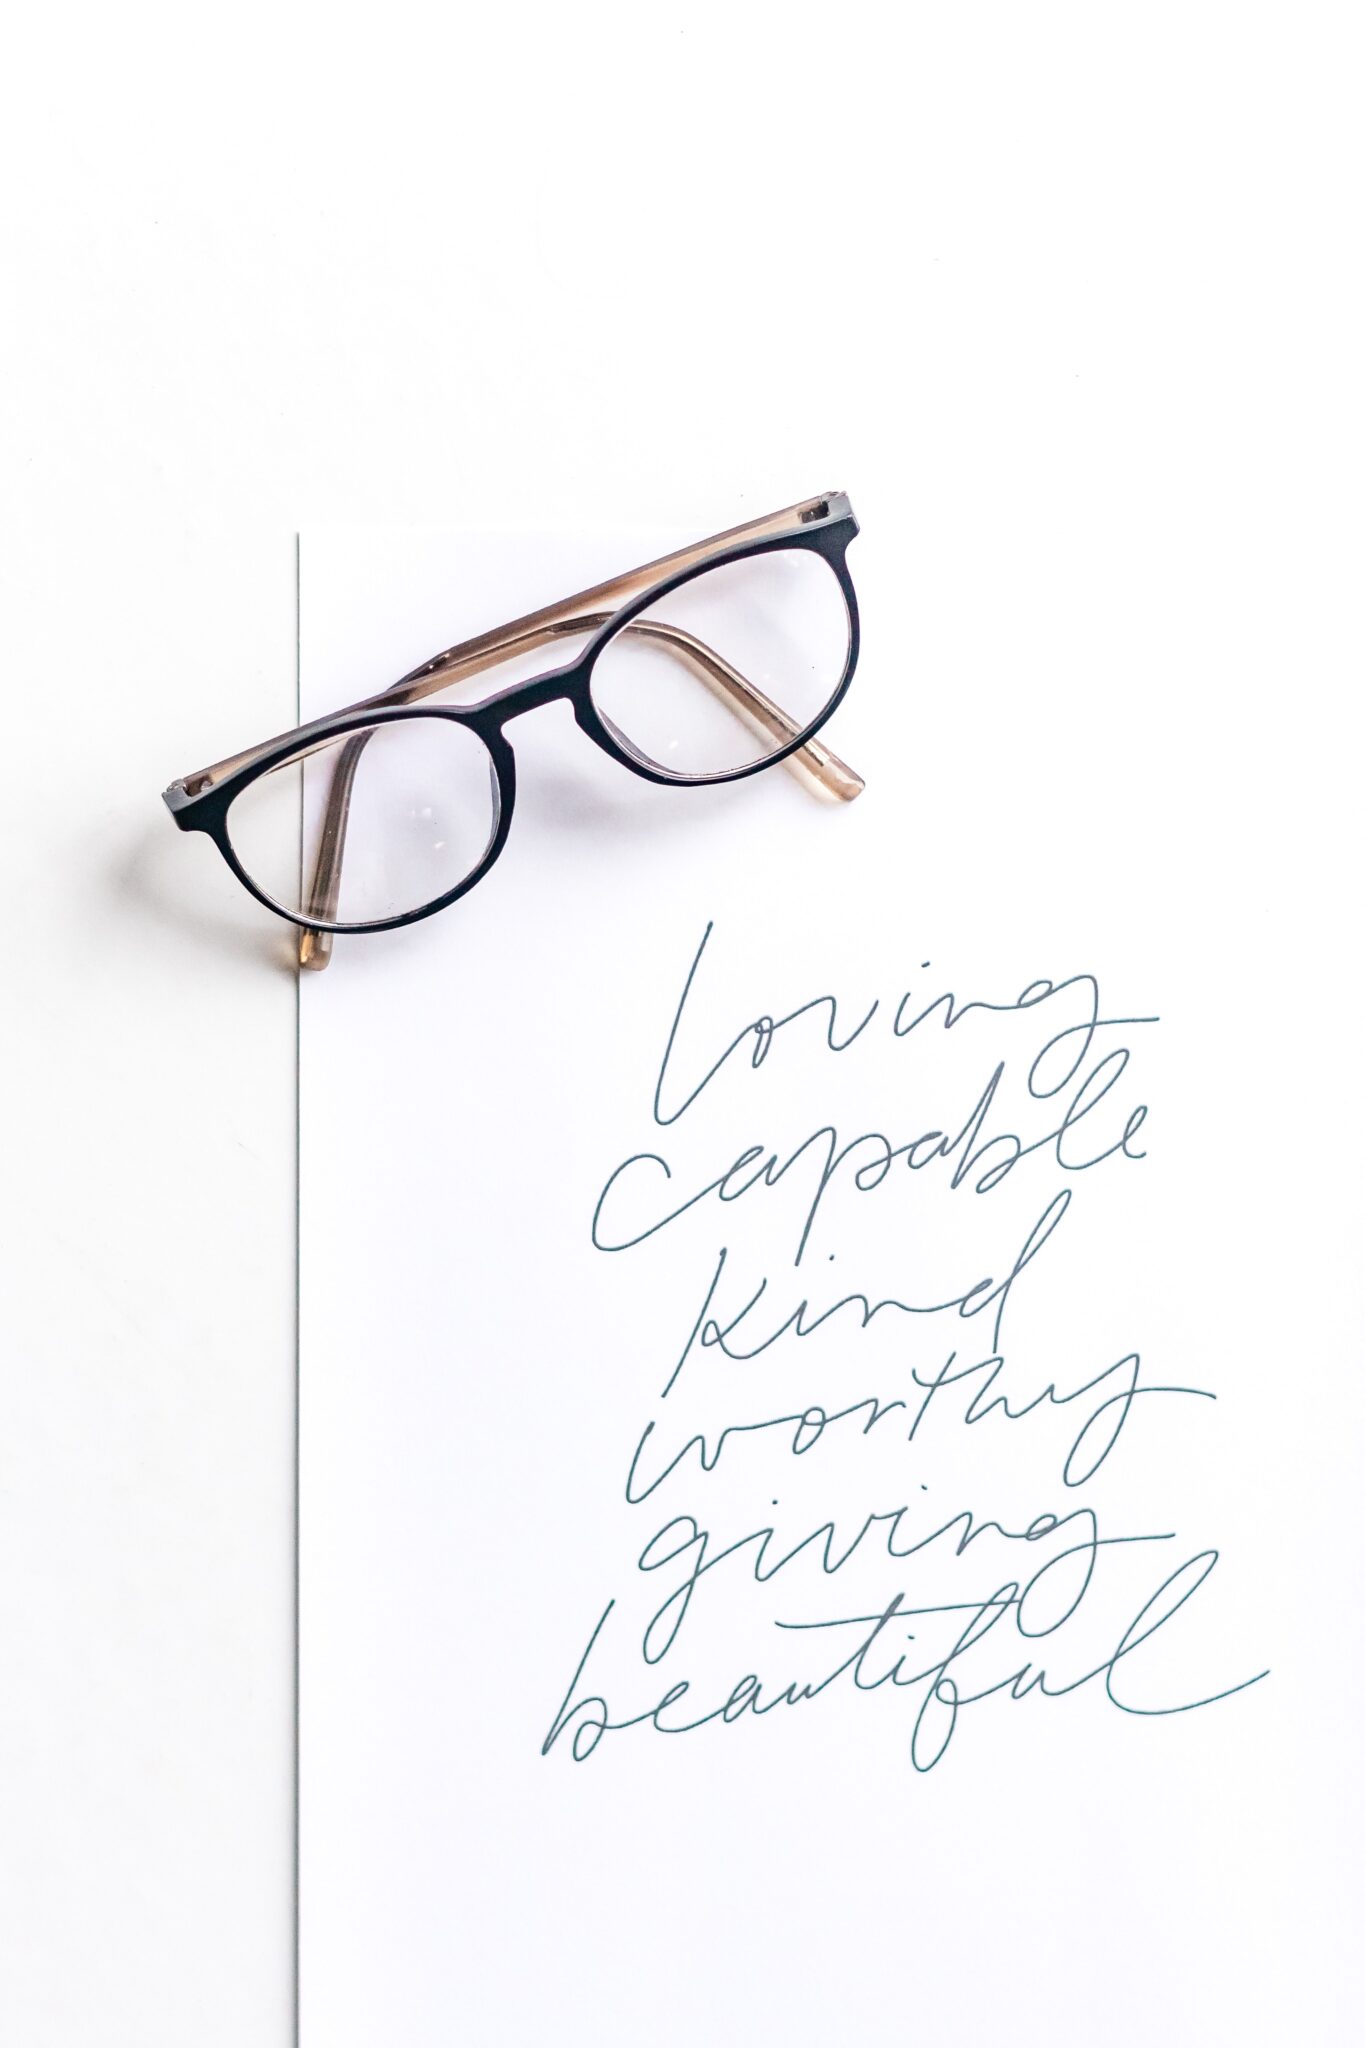 A paper shows 5 inspirational words and placed on top is a pair of black Rayban glasses. This article covers signs you might need prescription lenses.